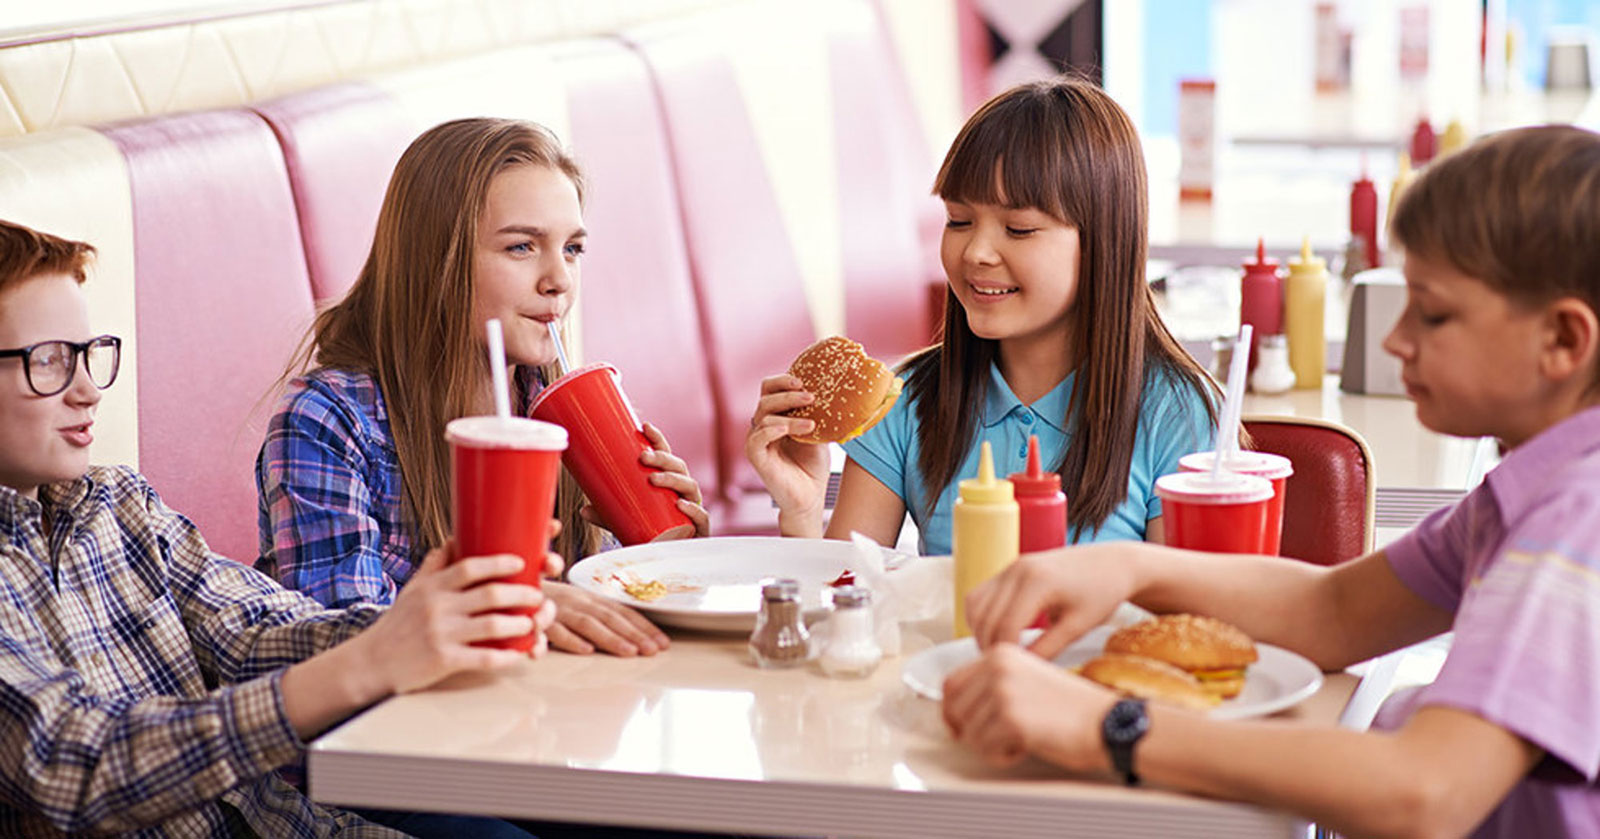 🍕 Do You Actually Have Terrible Food Opinions? Quiz Teenagers Eating At Fast Food restaurant